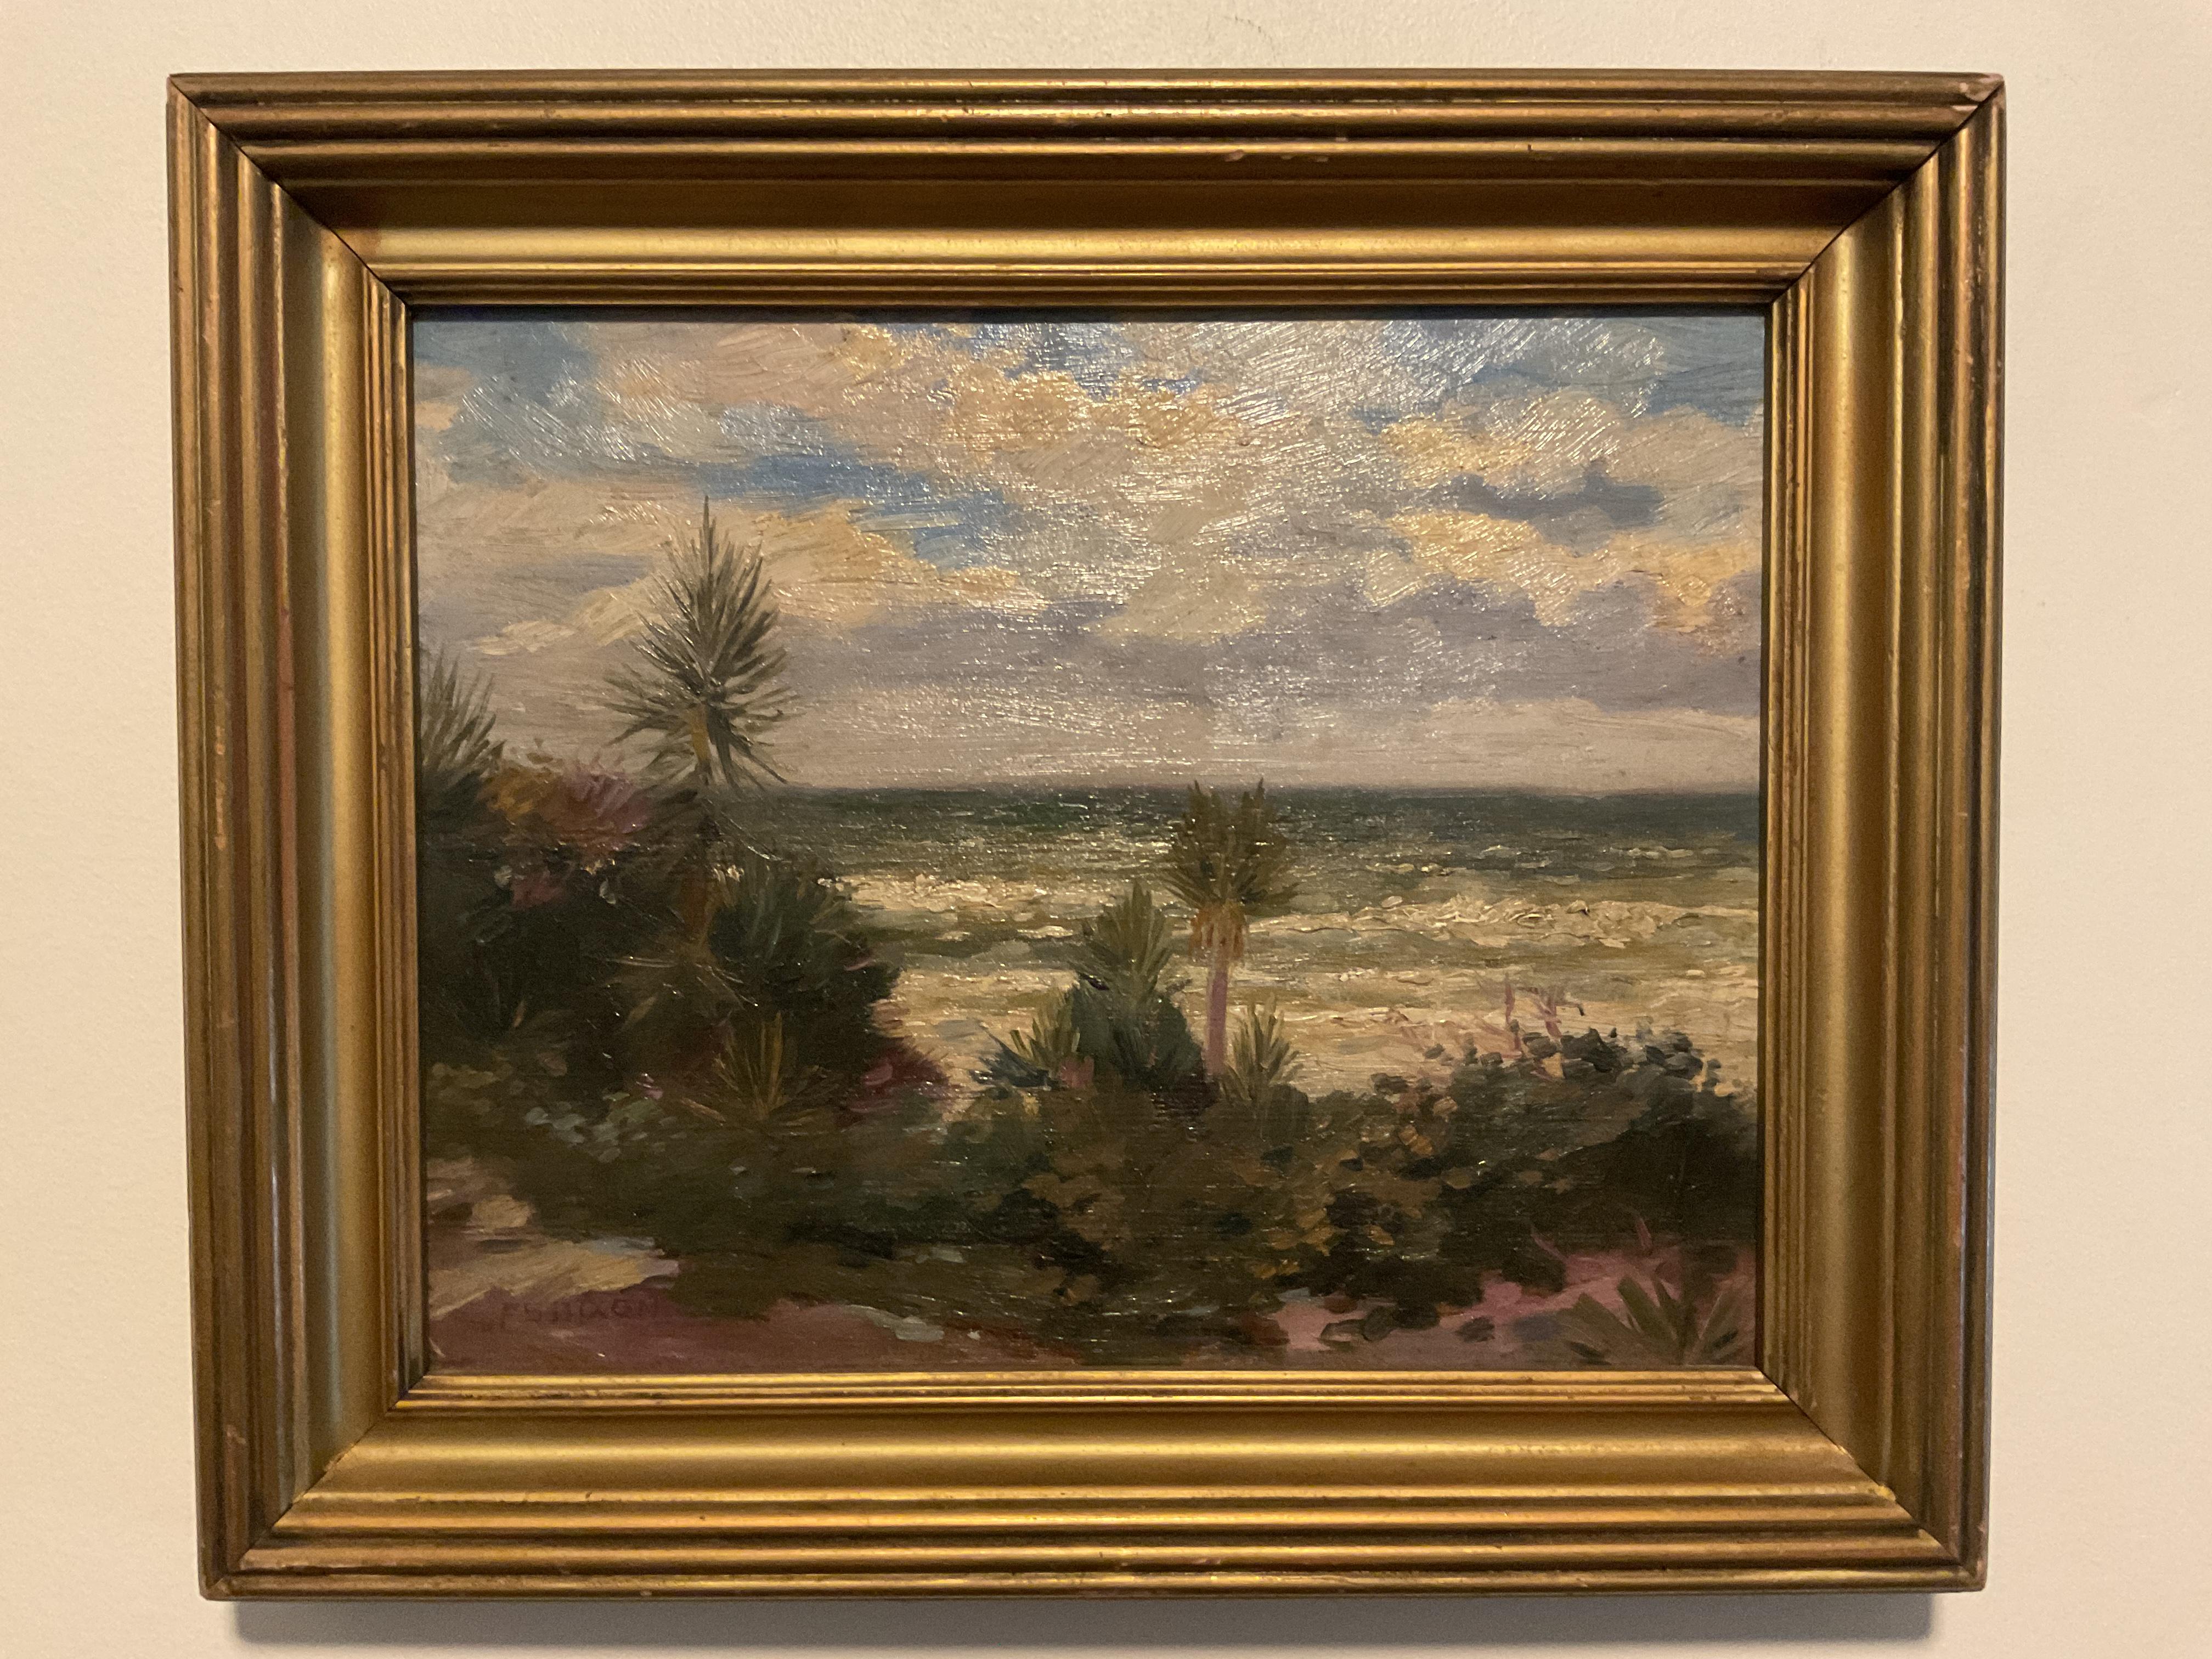 Francis Stillwell Dixon Landscape Painting - Charming Tropical Beach Oil Painting by listed artist Francis D. Dixon ca 1920’s